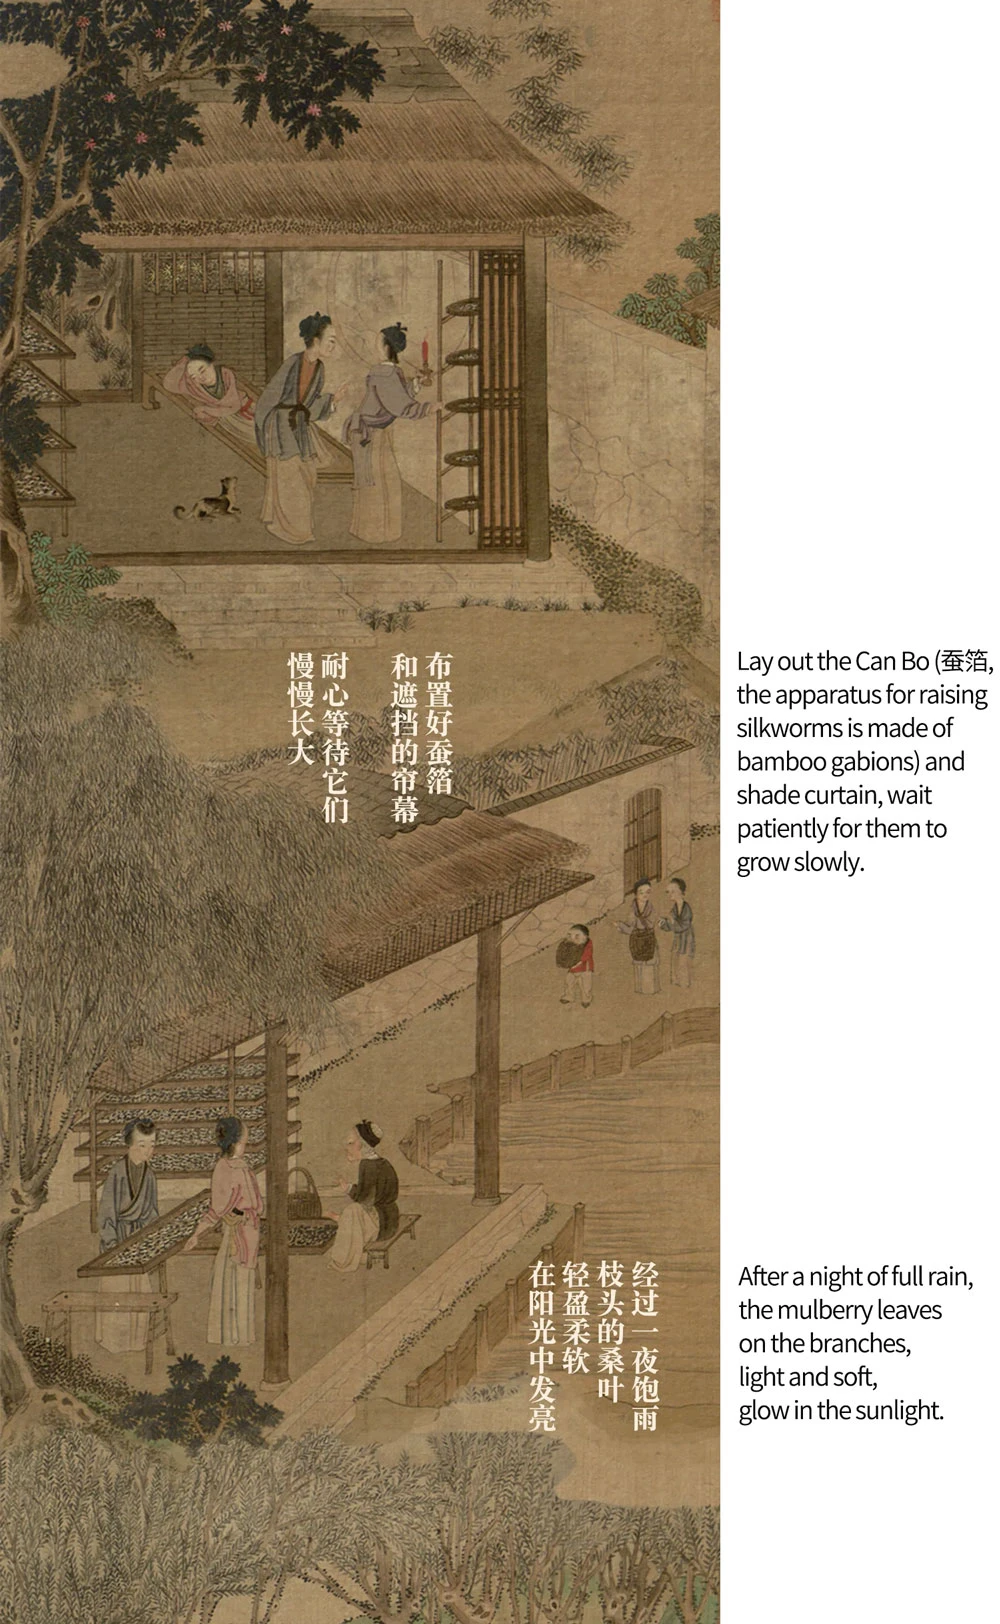 A Long Painting about Chinese Silk Production